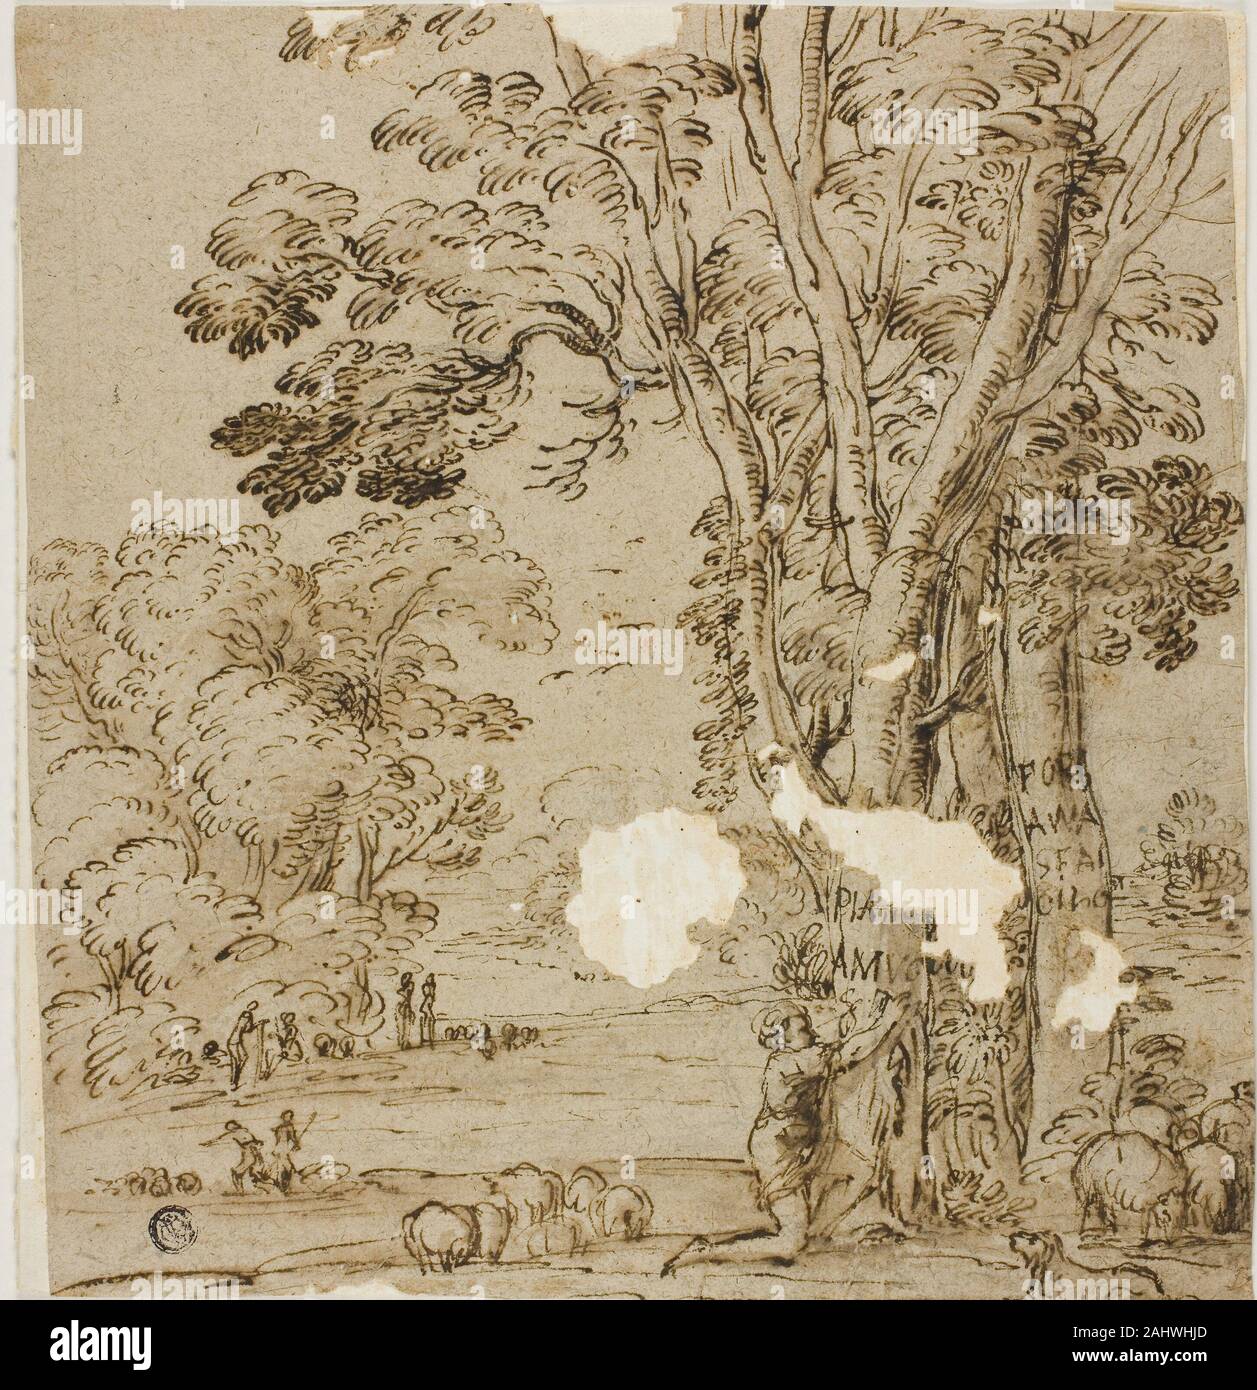 Agostino Tassi. Shepherd Carving an Inscription on Tree Trunk with Figures and Sheep in Background. 1500–1650. Italy. Pen and brown ink, with brush and brown wash, with traces of graphite, on blue laid paper (faded to brown), laid down on ivory laid paper Stock Photo